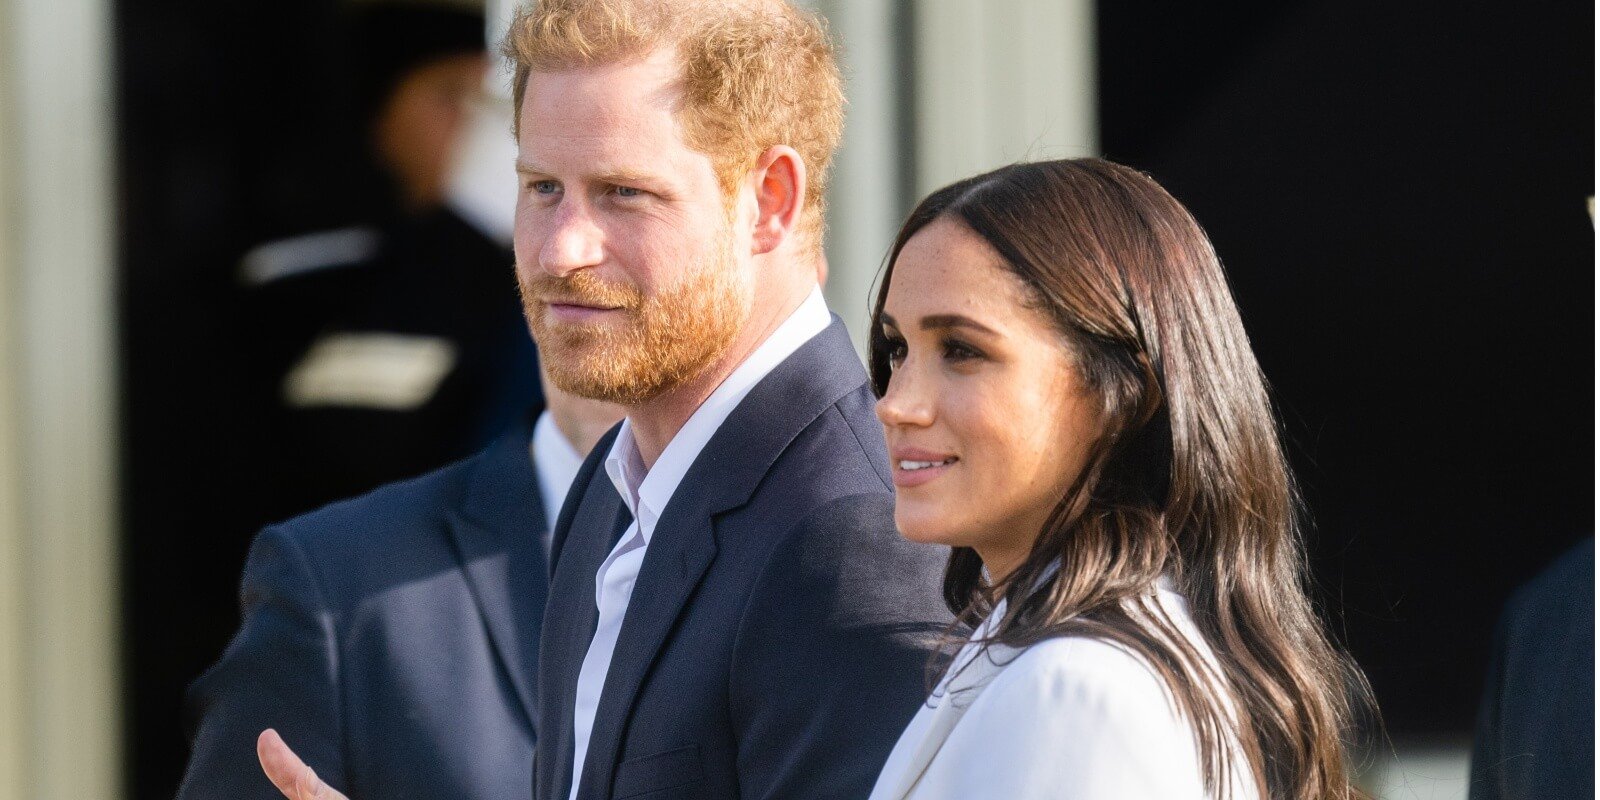 Prince Harry and Meghan Markle photographed at the Invictus Games at Nations Home at Zuiderpark on April 15, 2022 in The Hague, Netherlands.